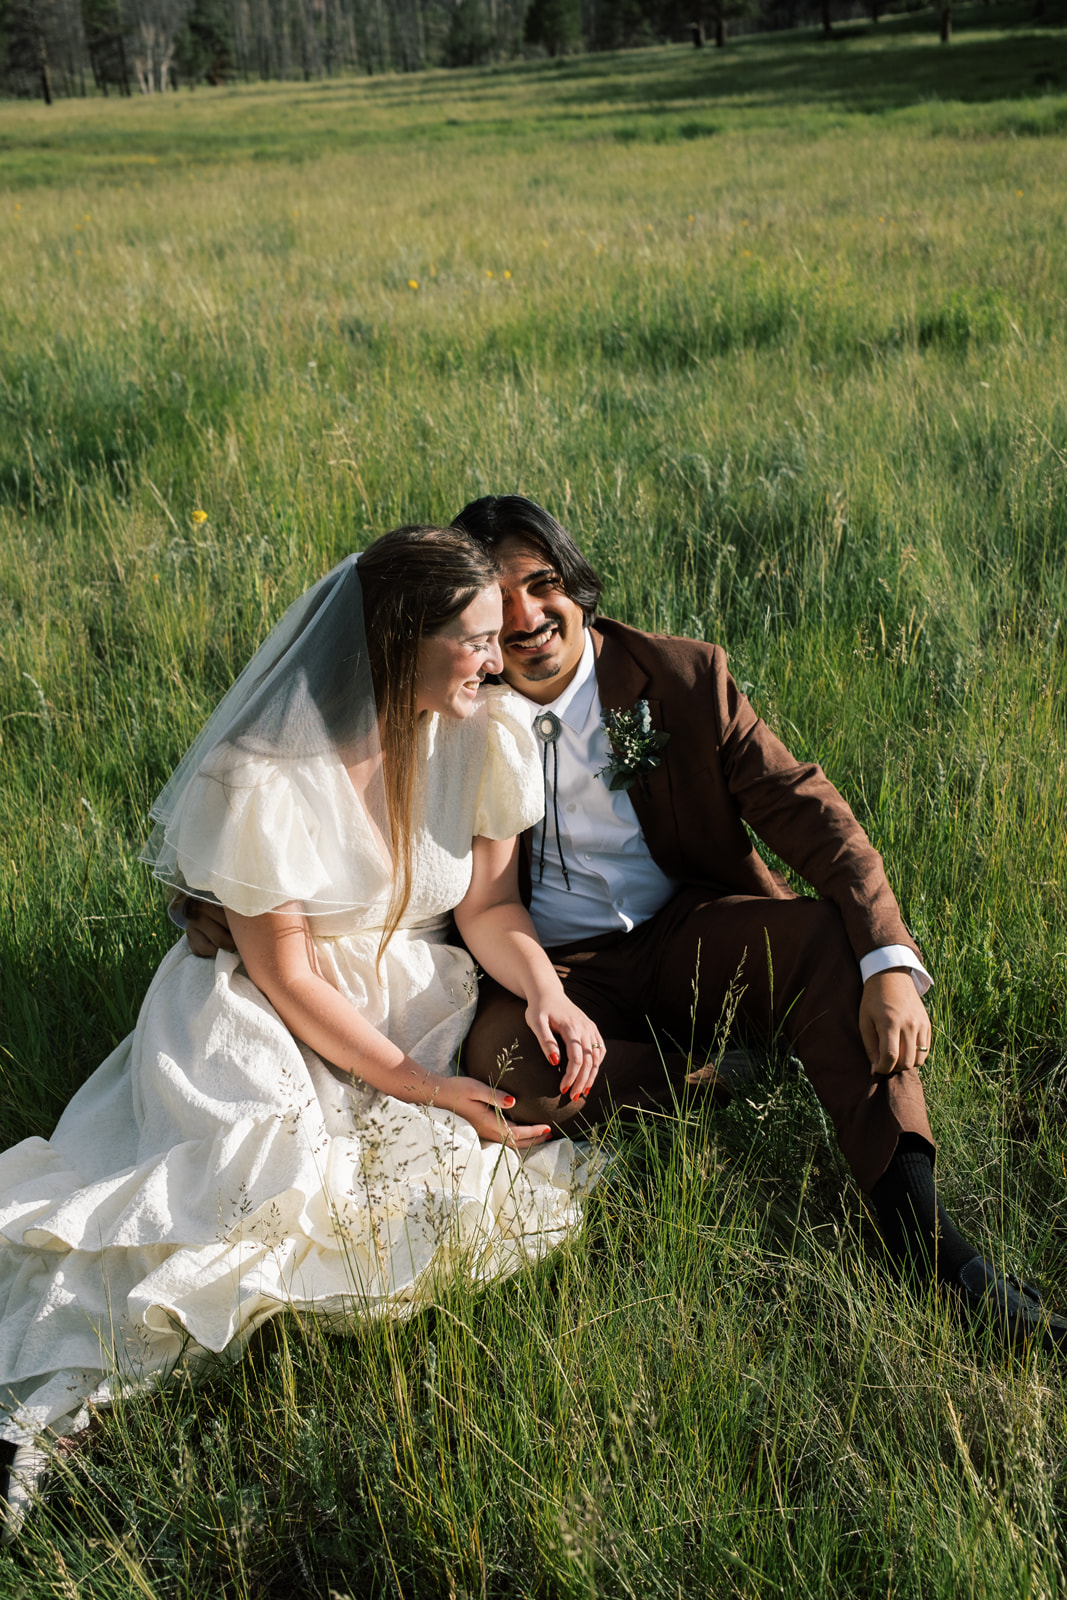 A couple who eloped in Rocky Mountain Park say their vows in an open field. 